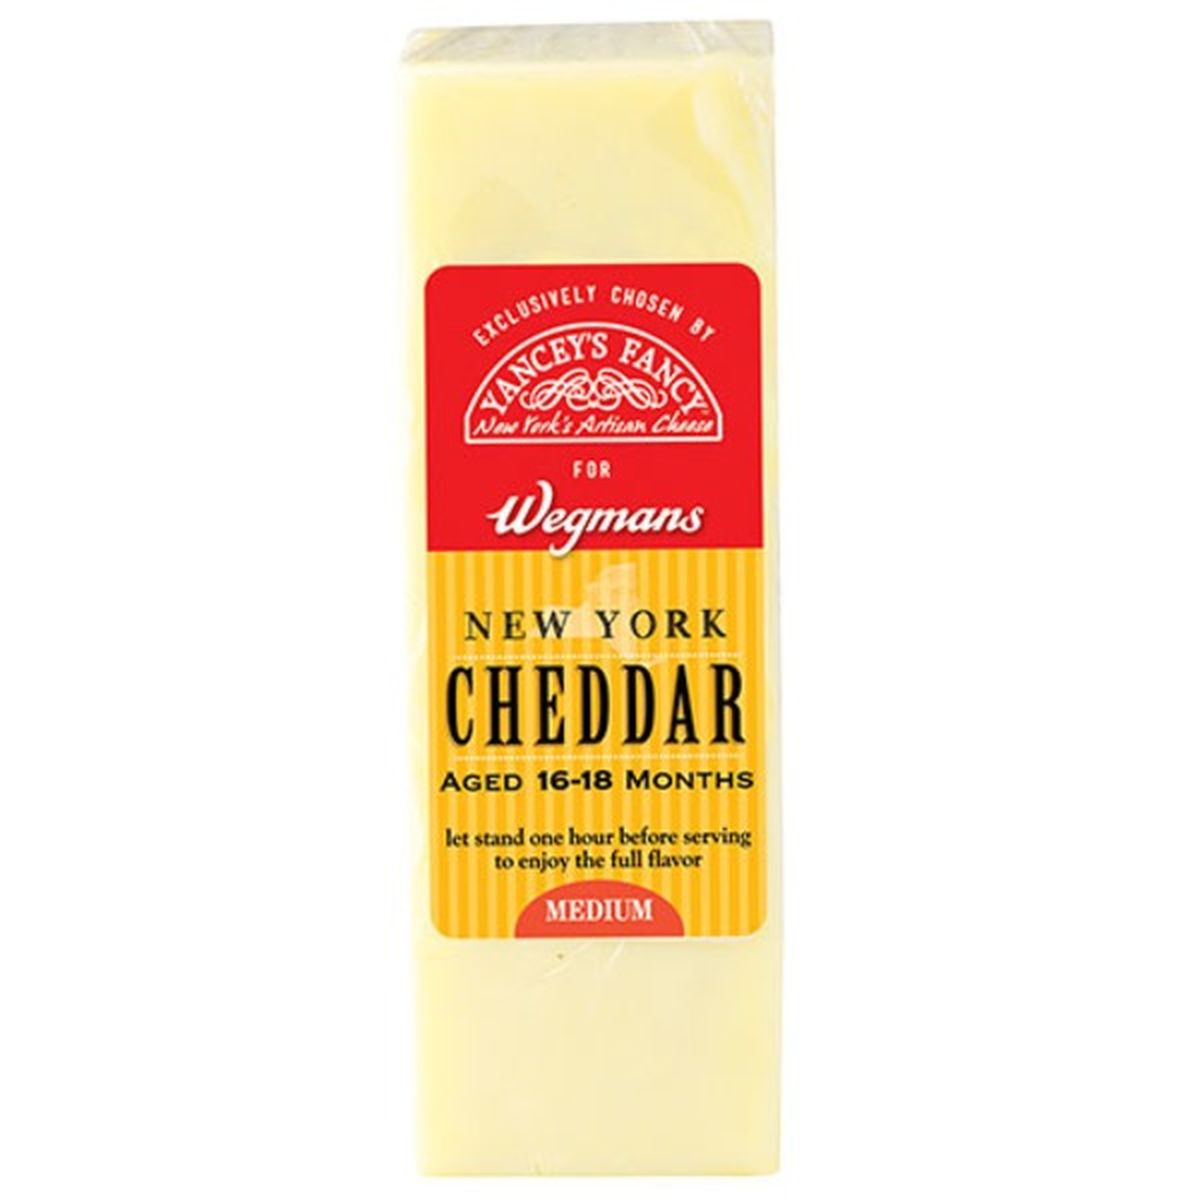 Calories in Wegmans 16-18 Month Aged White Cheddar Cheese